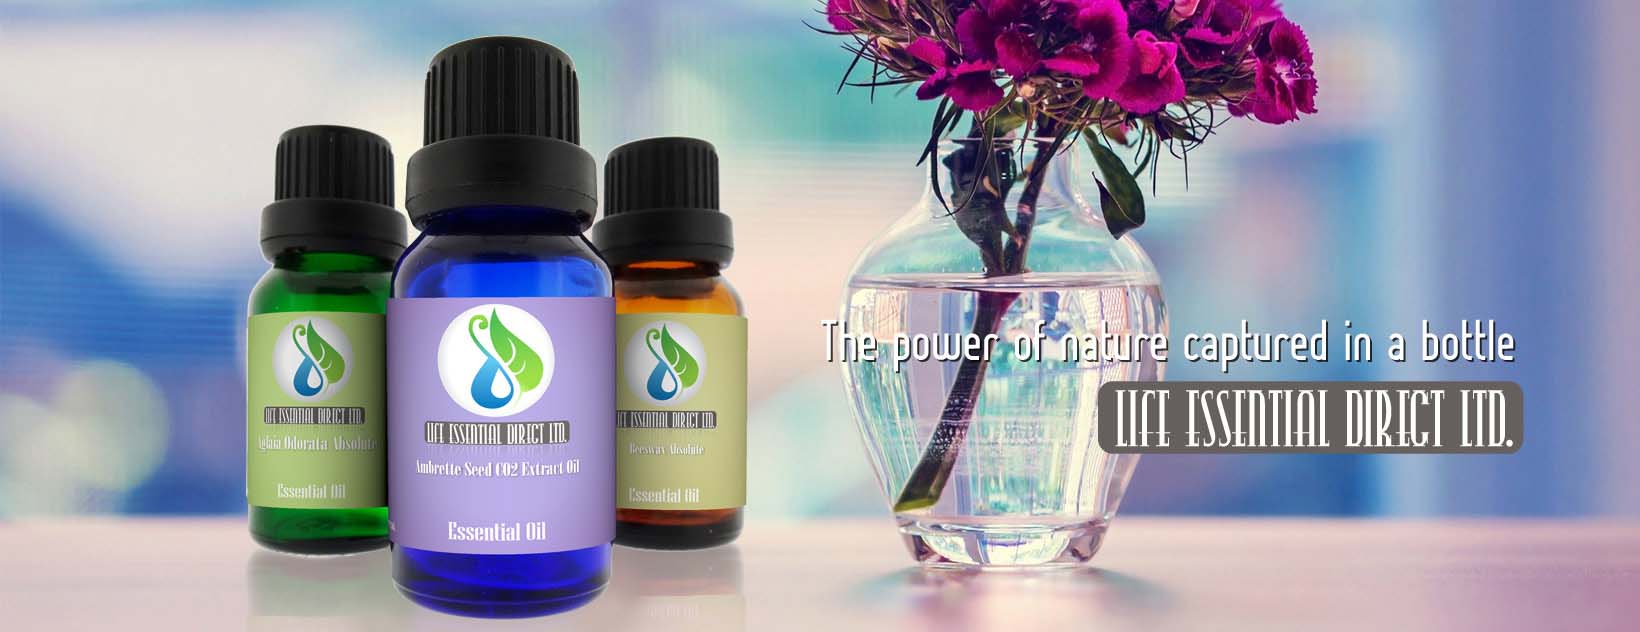 Essential Oils Shopping page